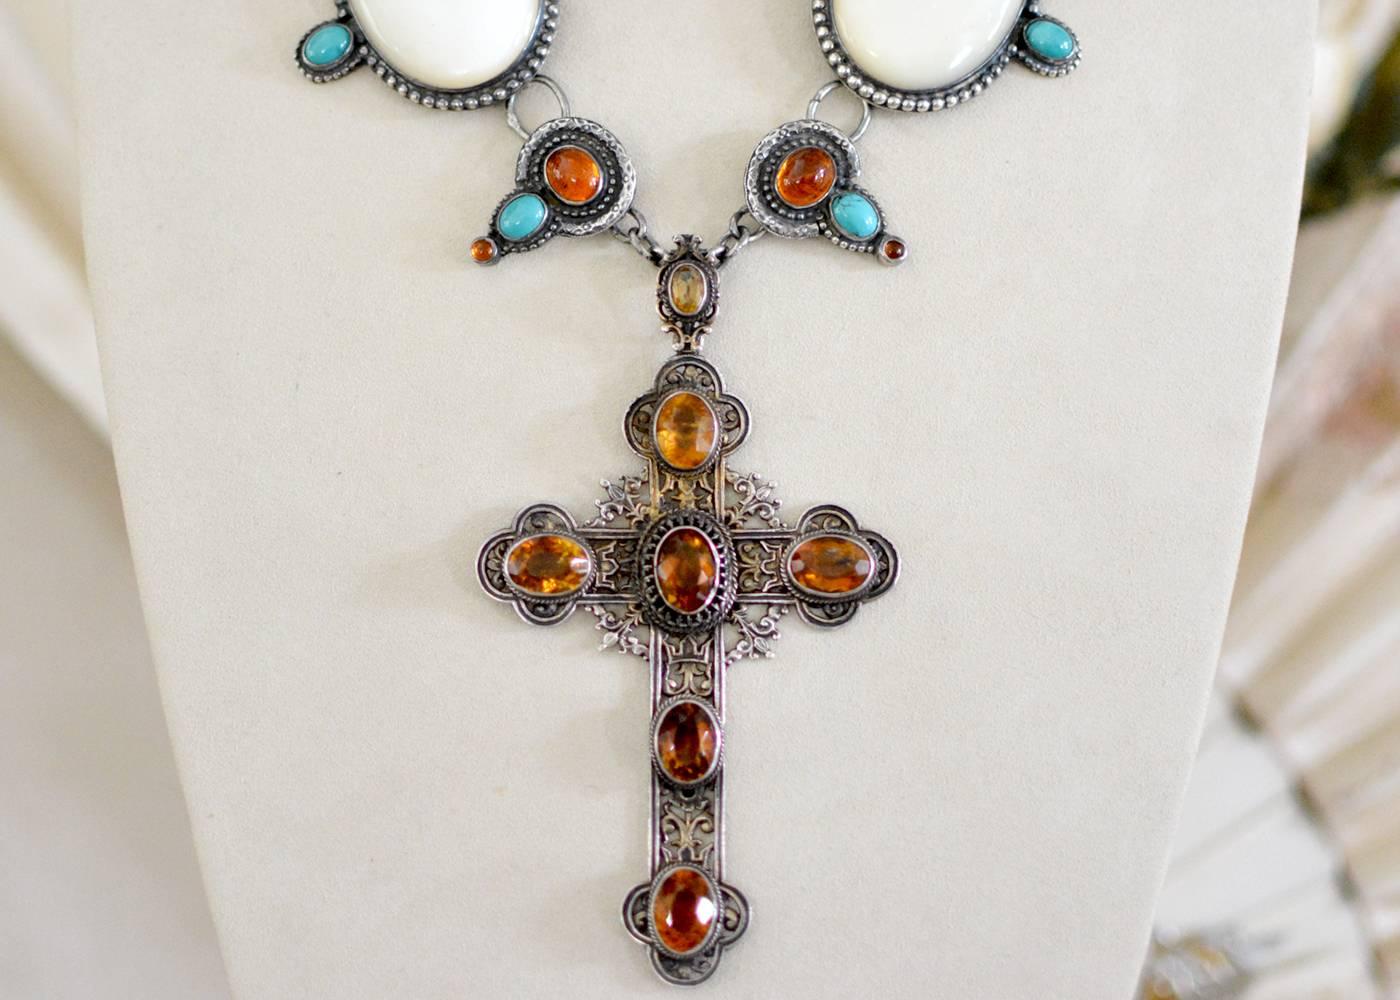 1800s necklace